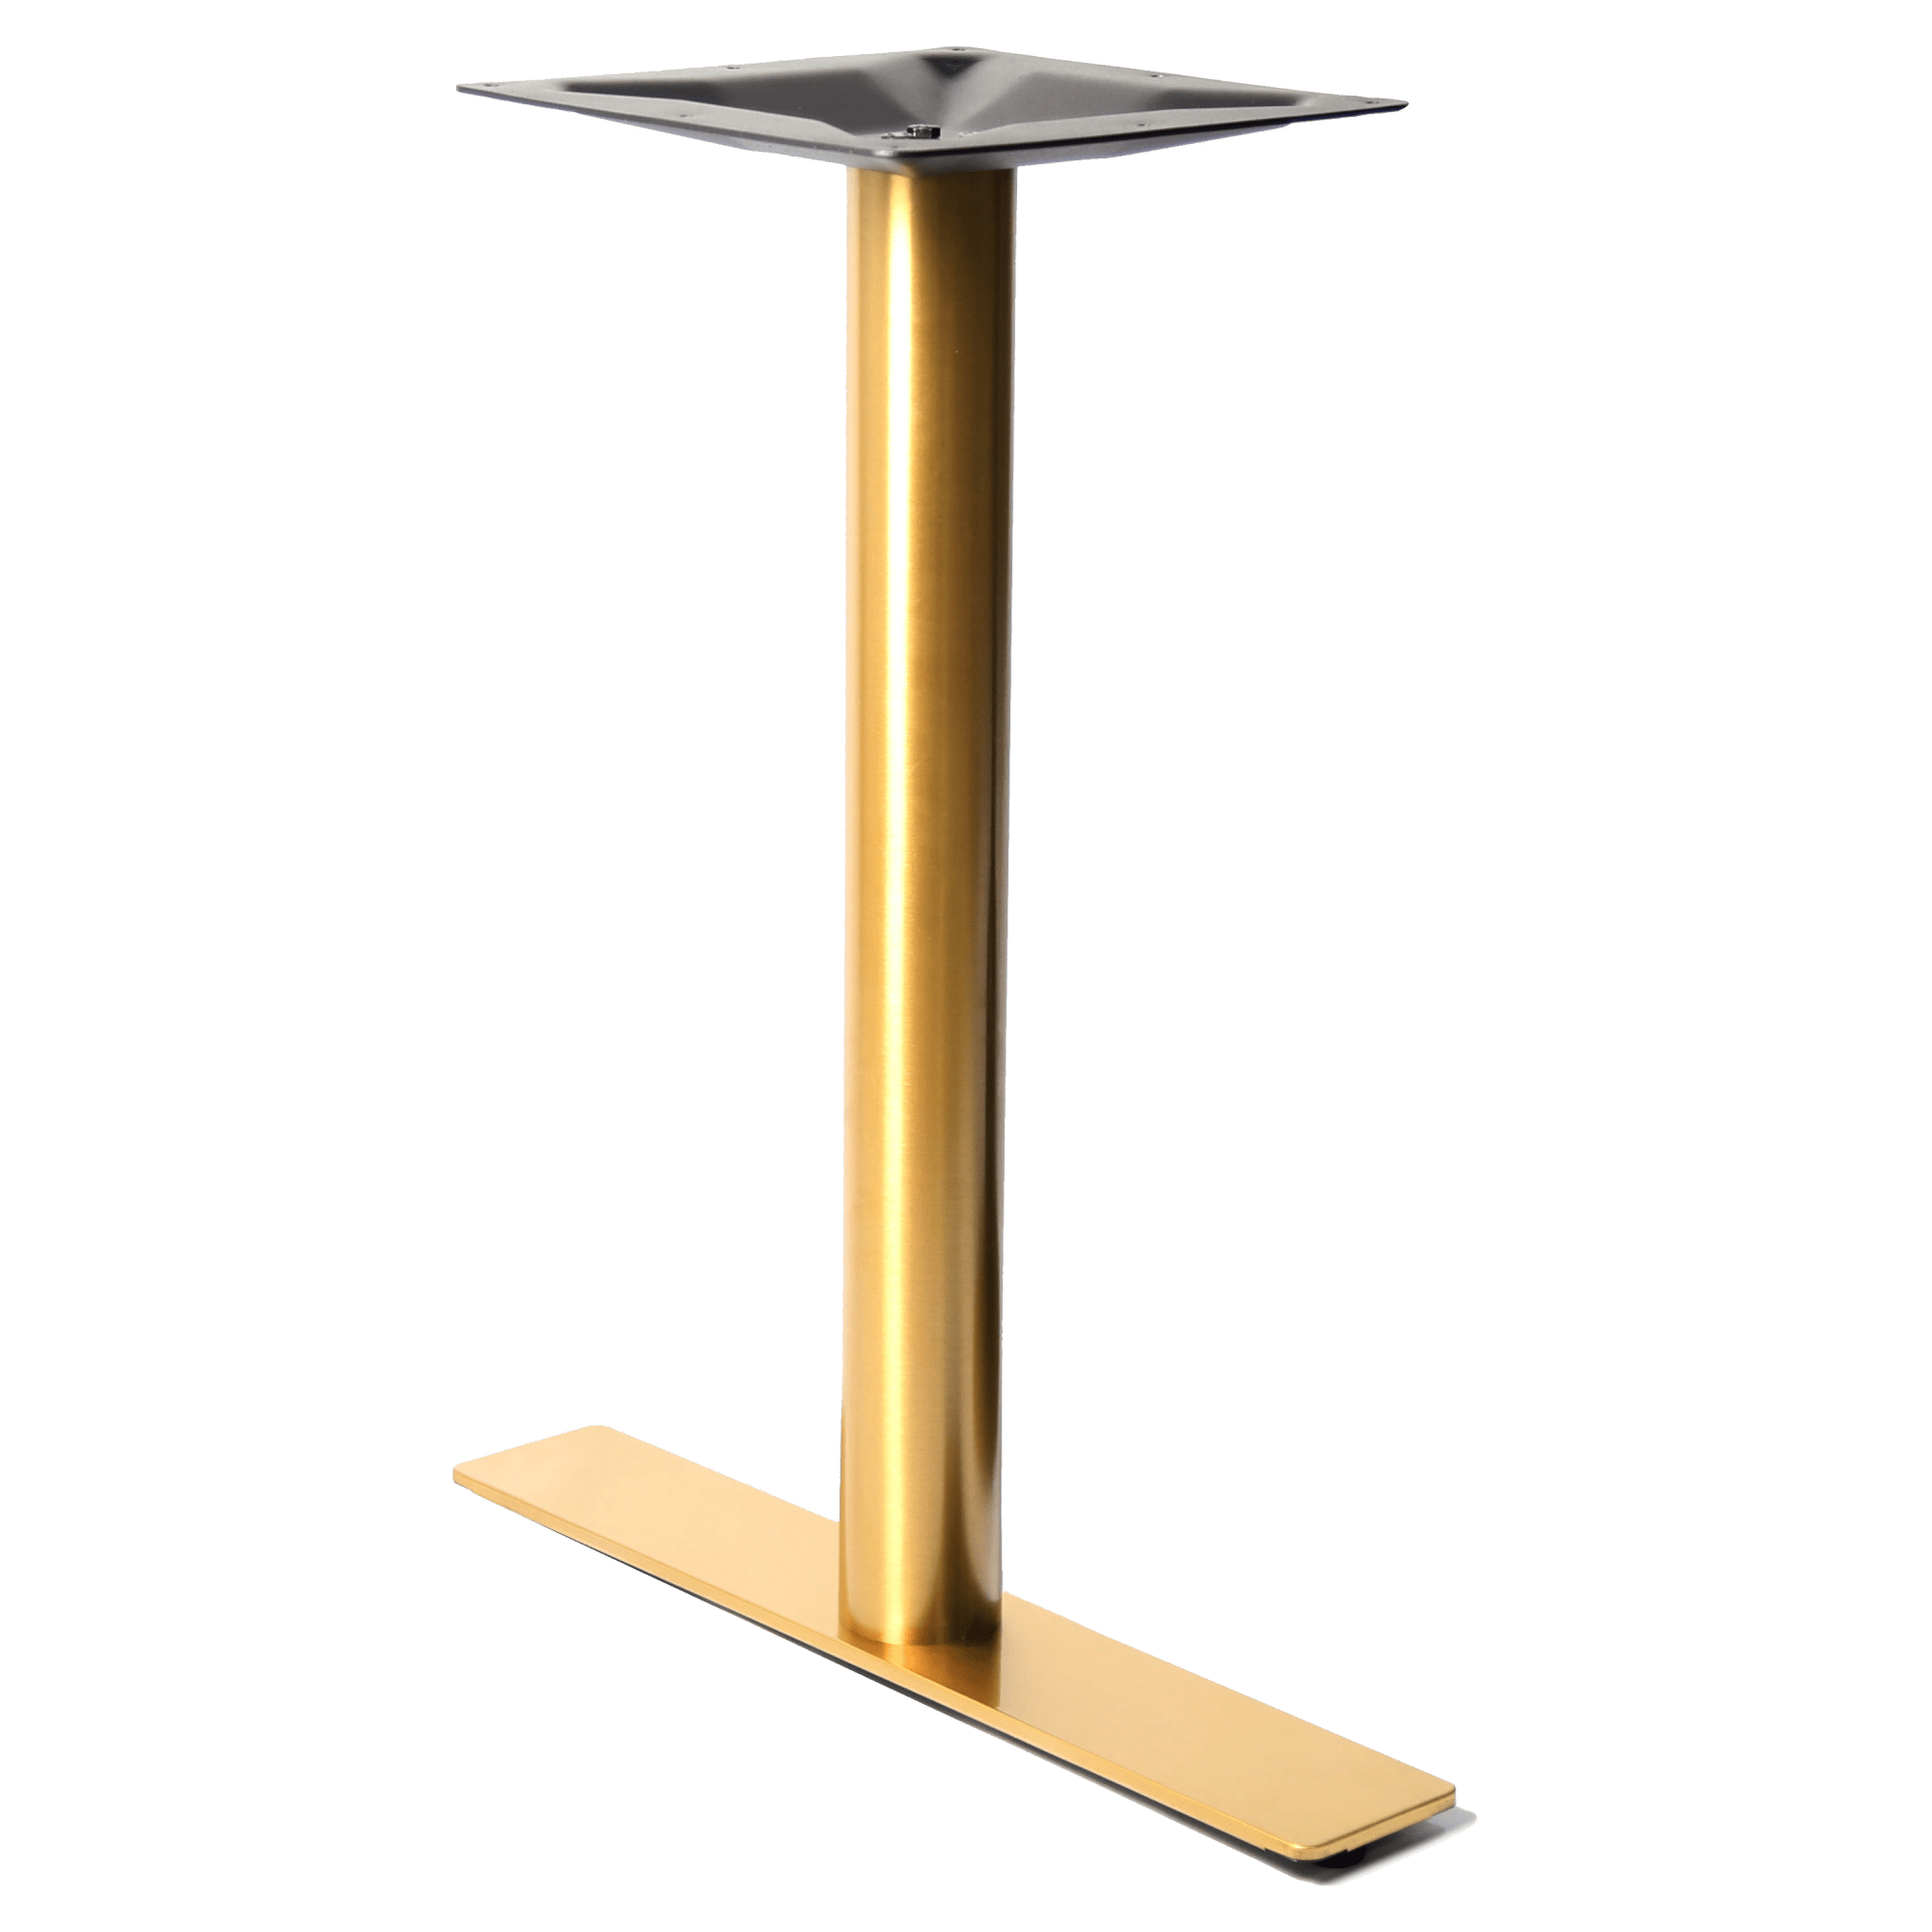 Gold Square Stainless Steel Table Base with Gold Square Stainless Steel Table Base